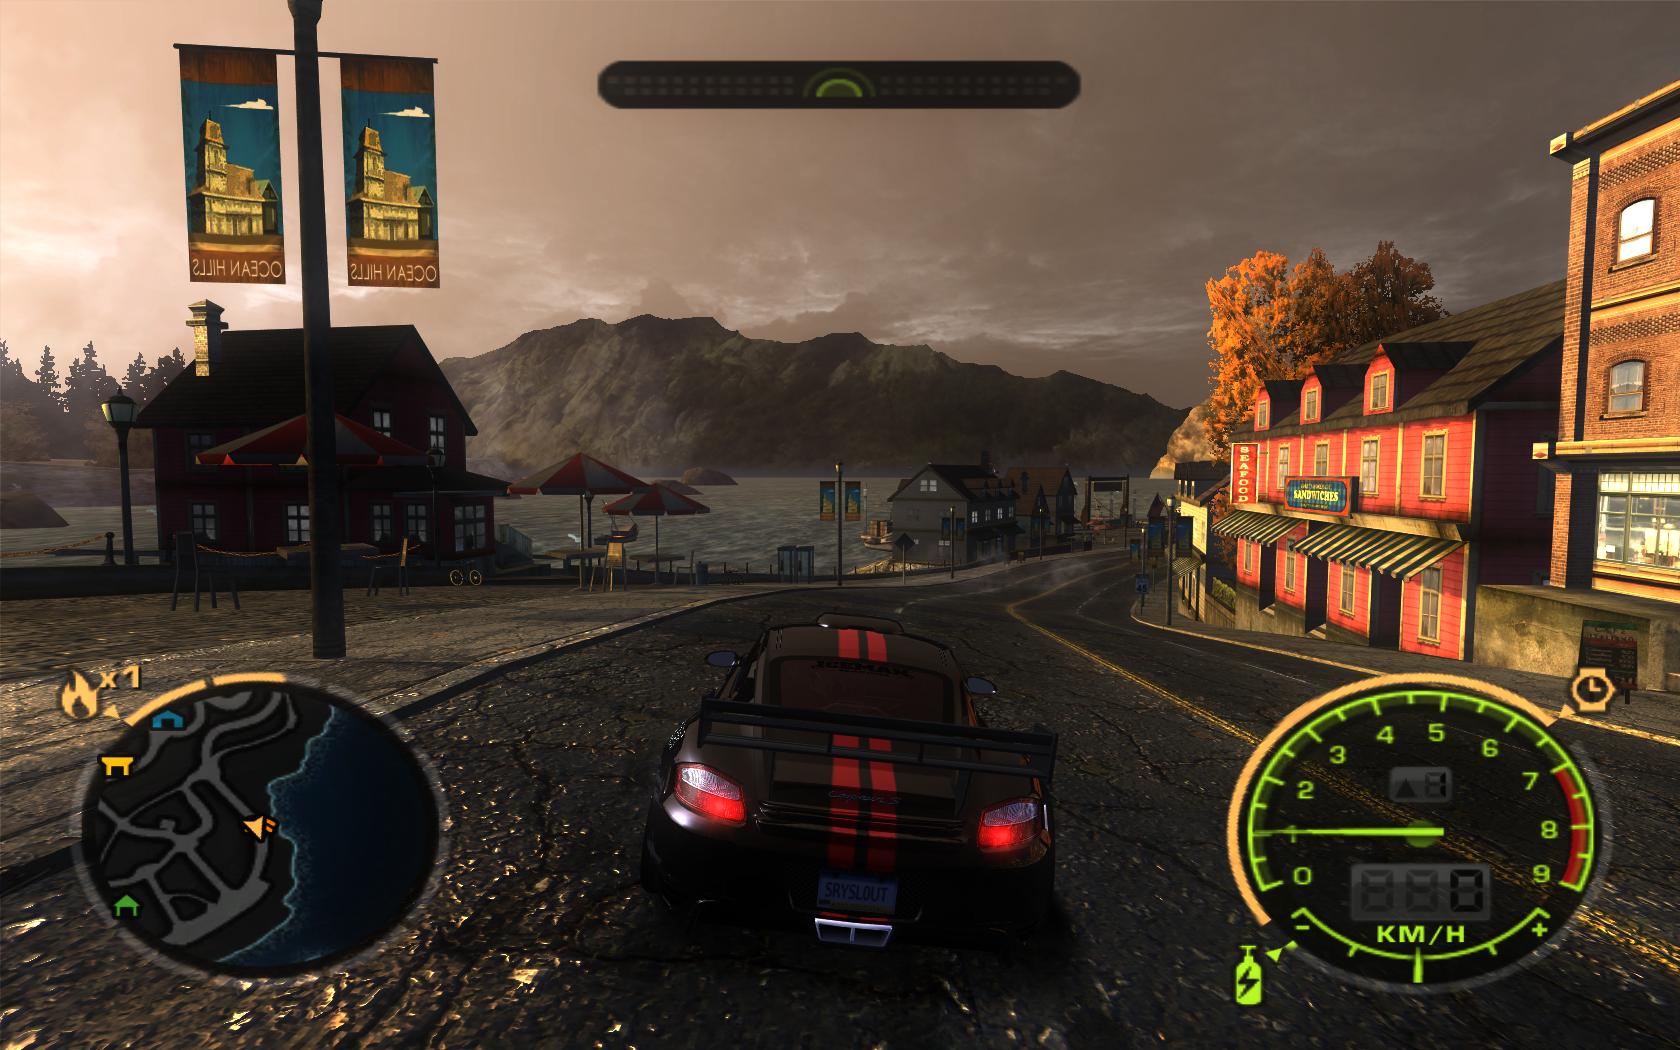 Download nfs most wanted black edition 100 save game